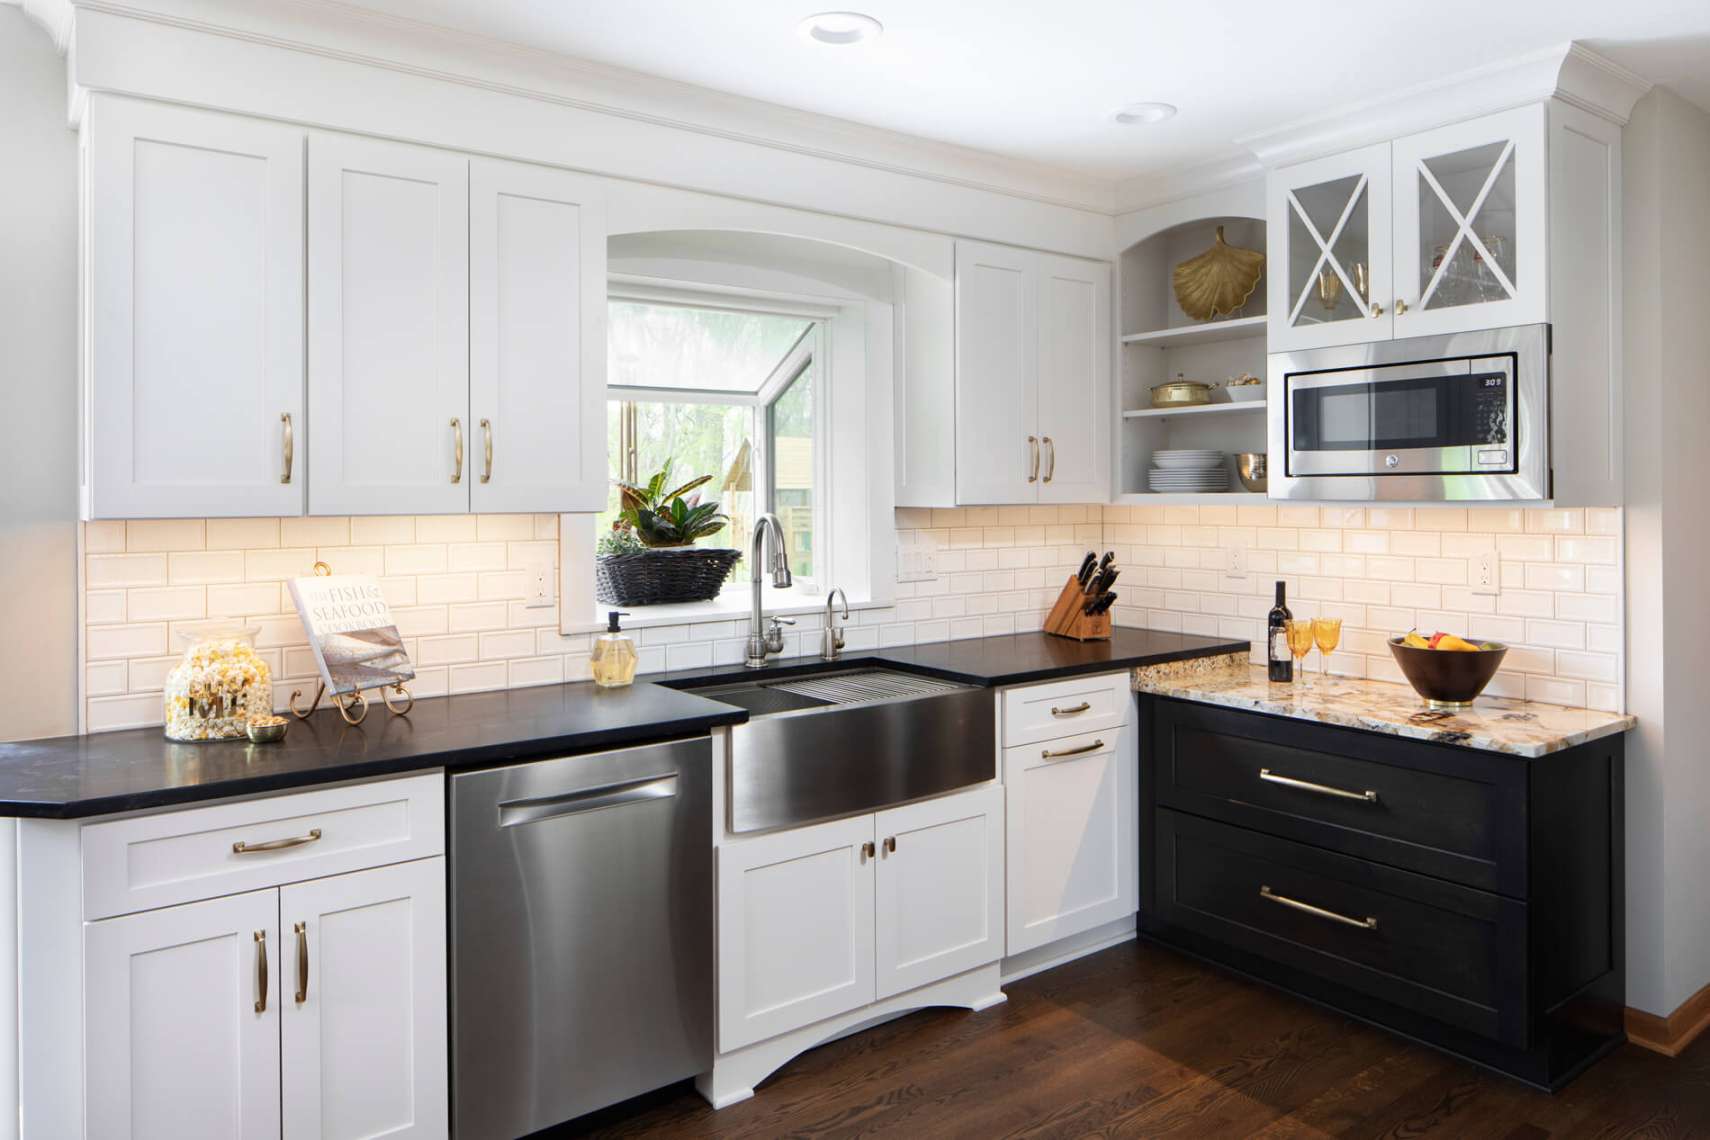 Kitchen Design : How to Choose Corner Wall Cabinetry Styles for